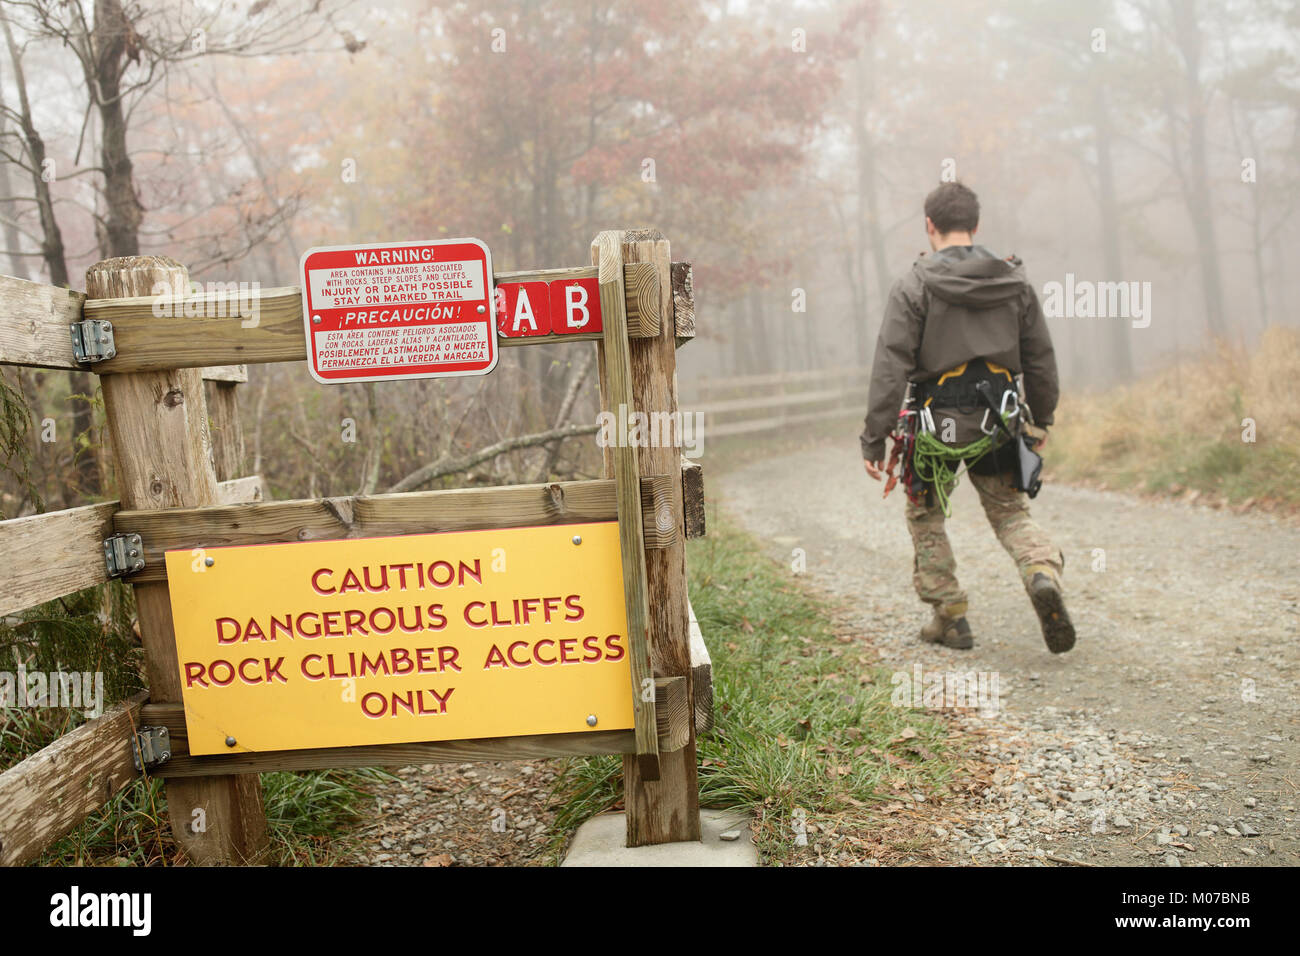 A person with climbing gear walks past a danger sign at Pilot Mountain State Park, North Carolina, USA Stock Photo